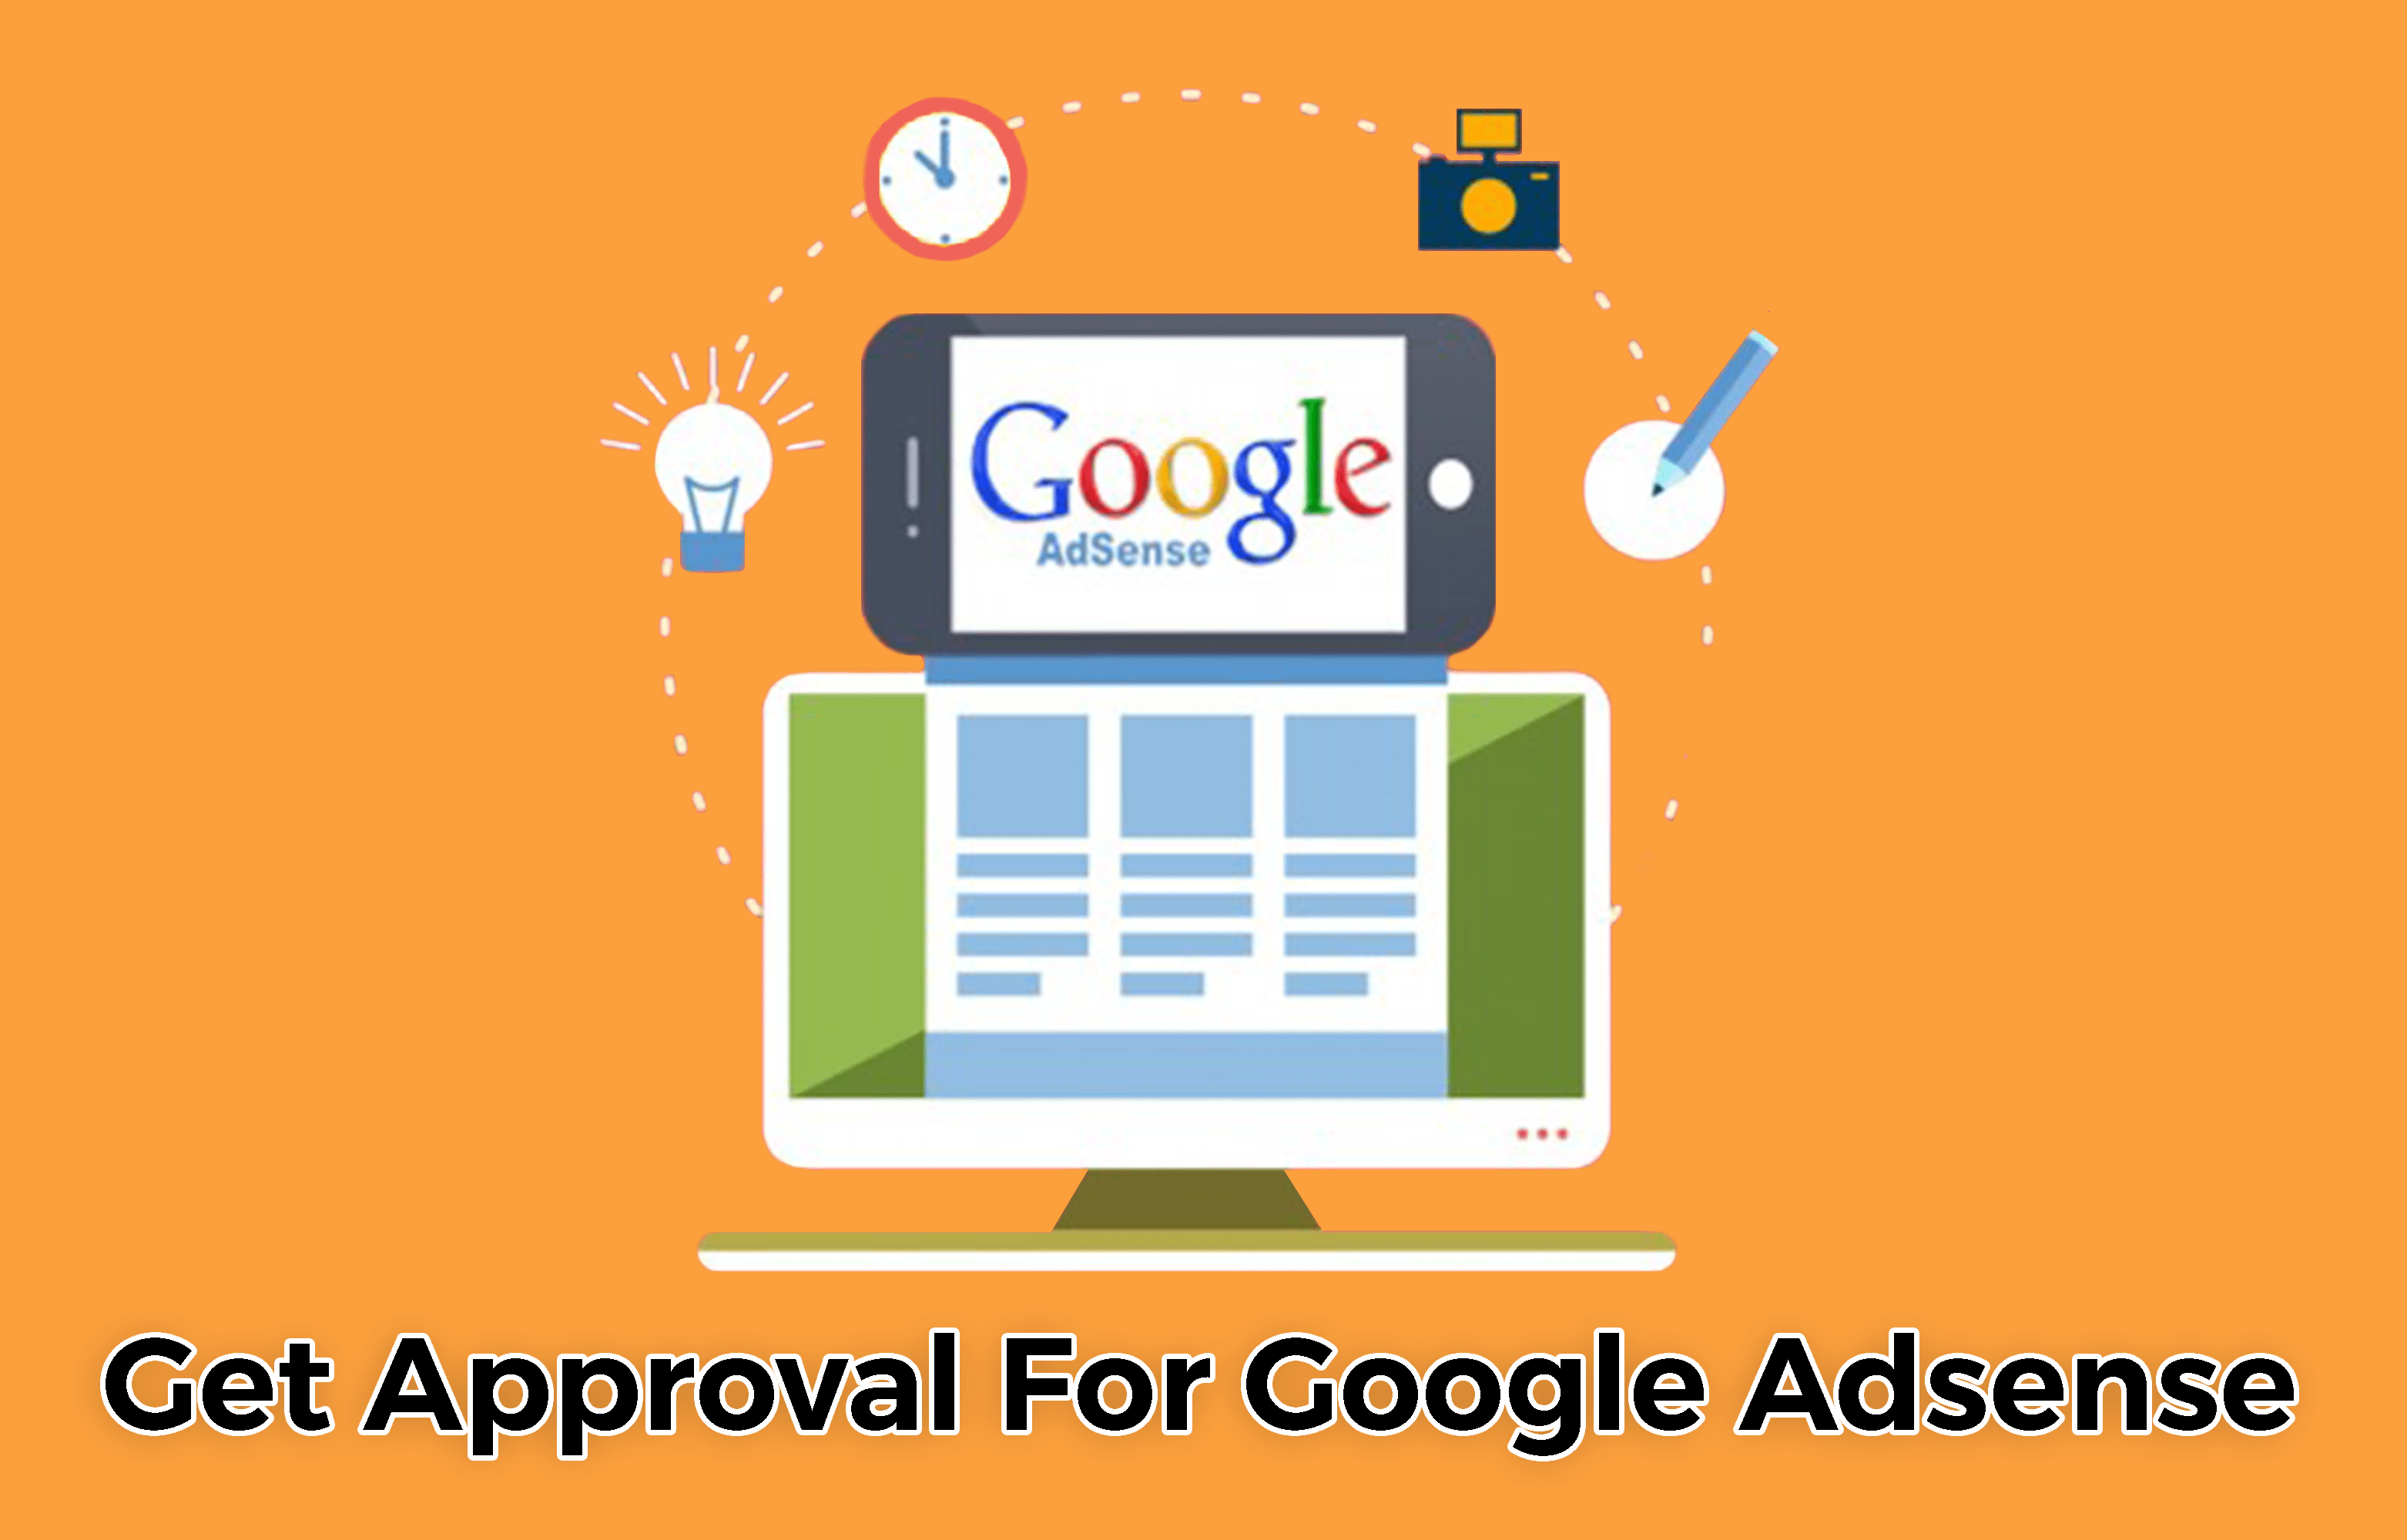 How To Get Quick Approval For Google Adsense